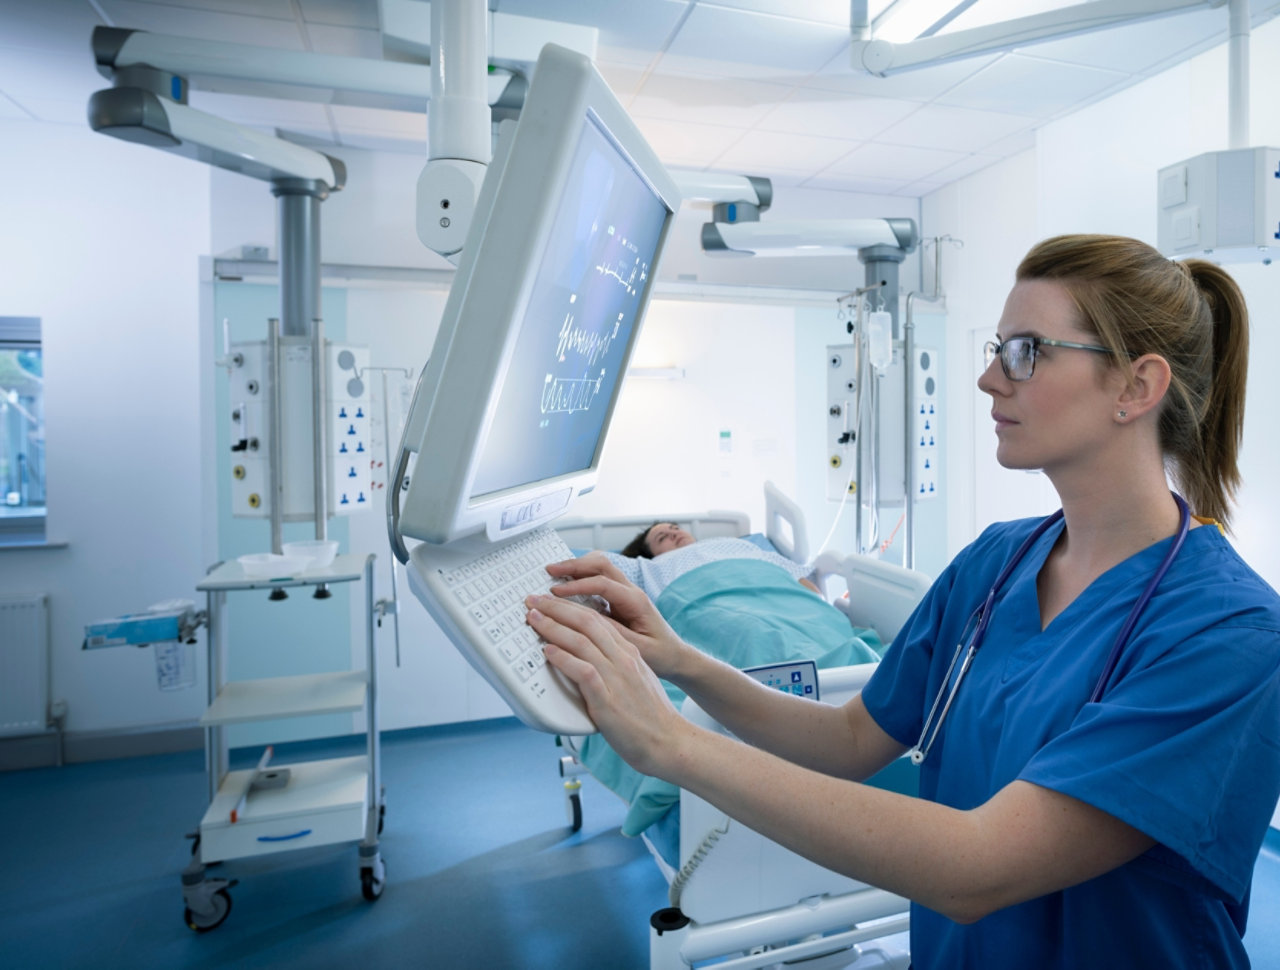 Nurse looking at a screen in an intensive care unit